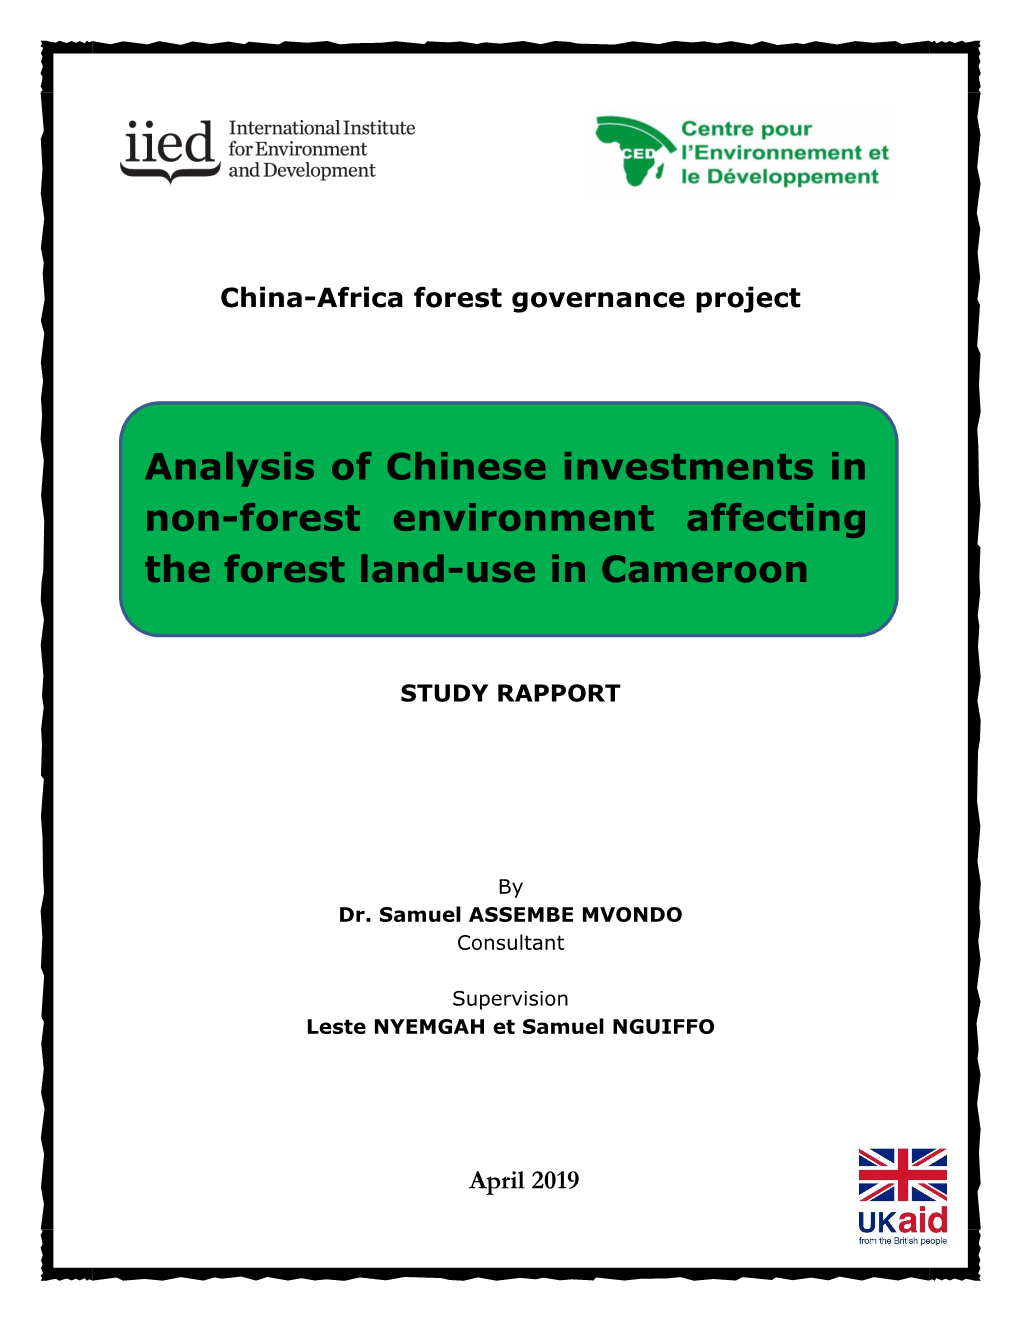 Analysis of Chinese Investments in Non-Forest Environment Affecting the Forest Land-Use in Cameroon